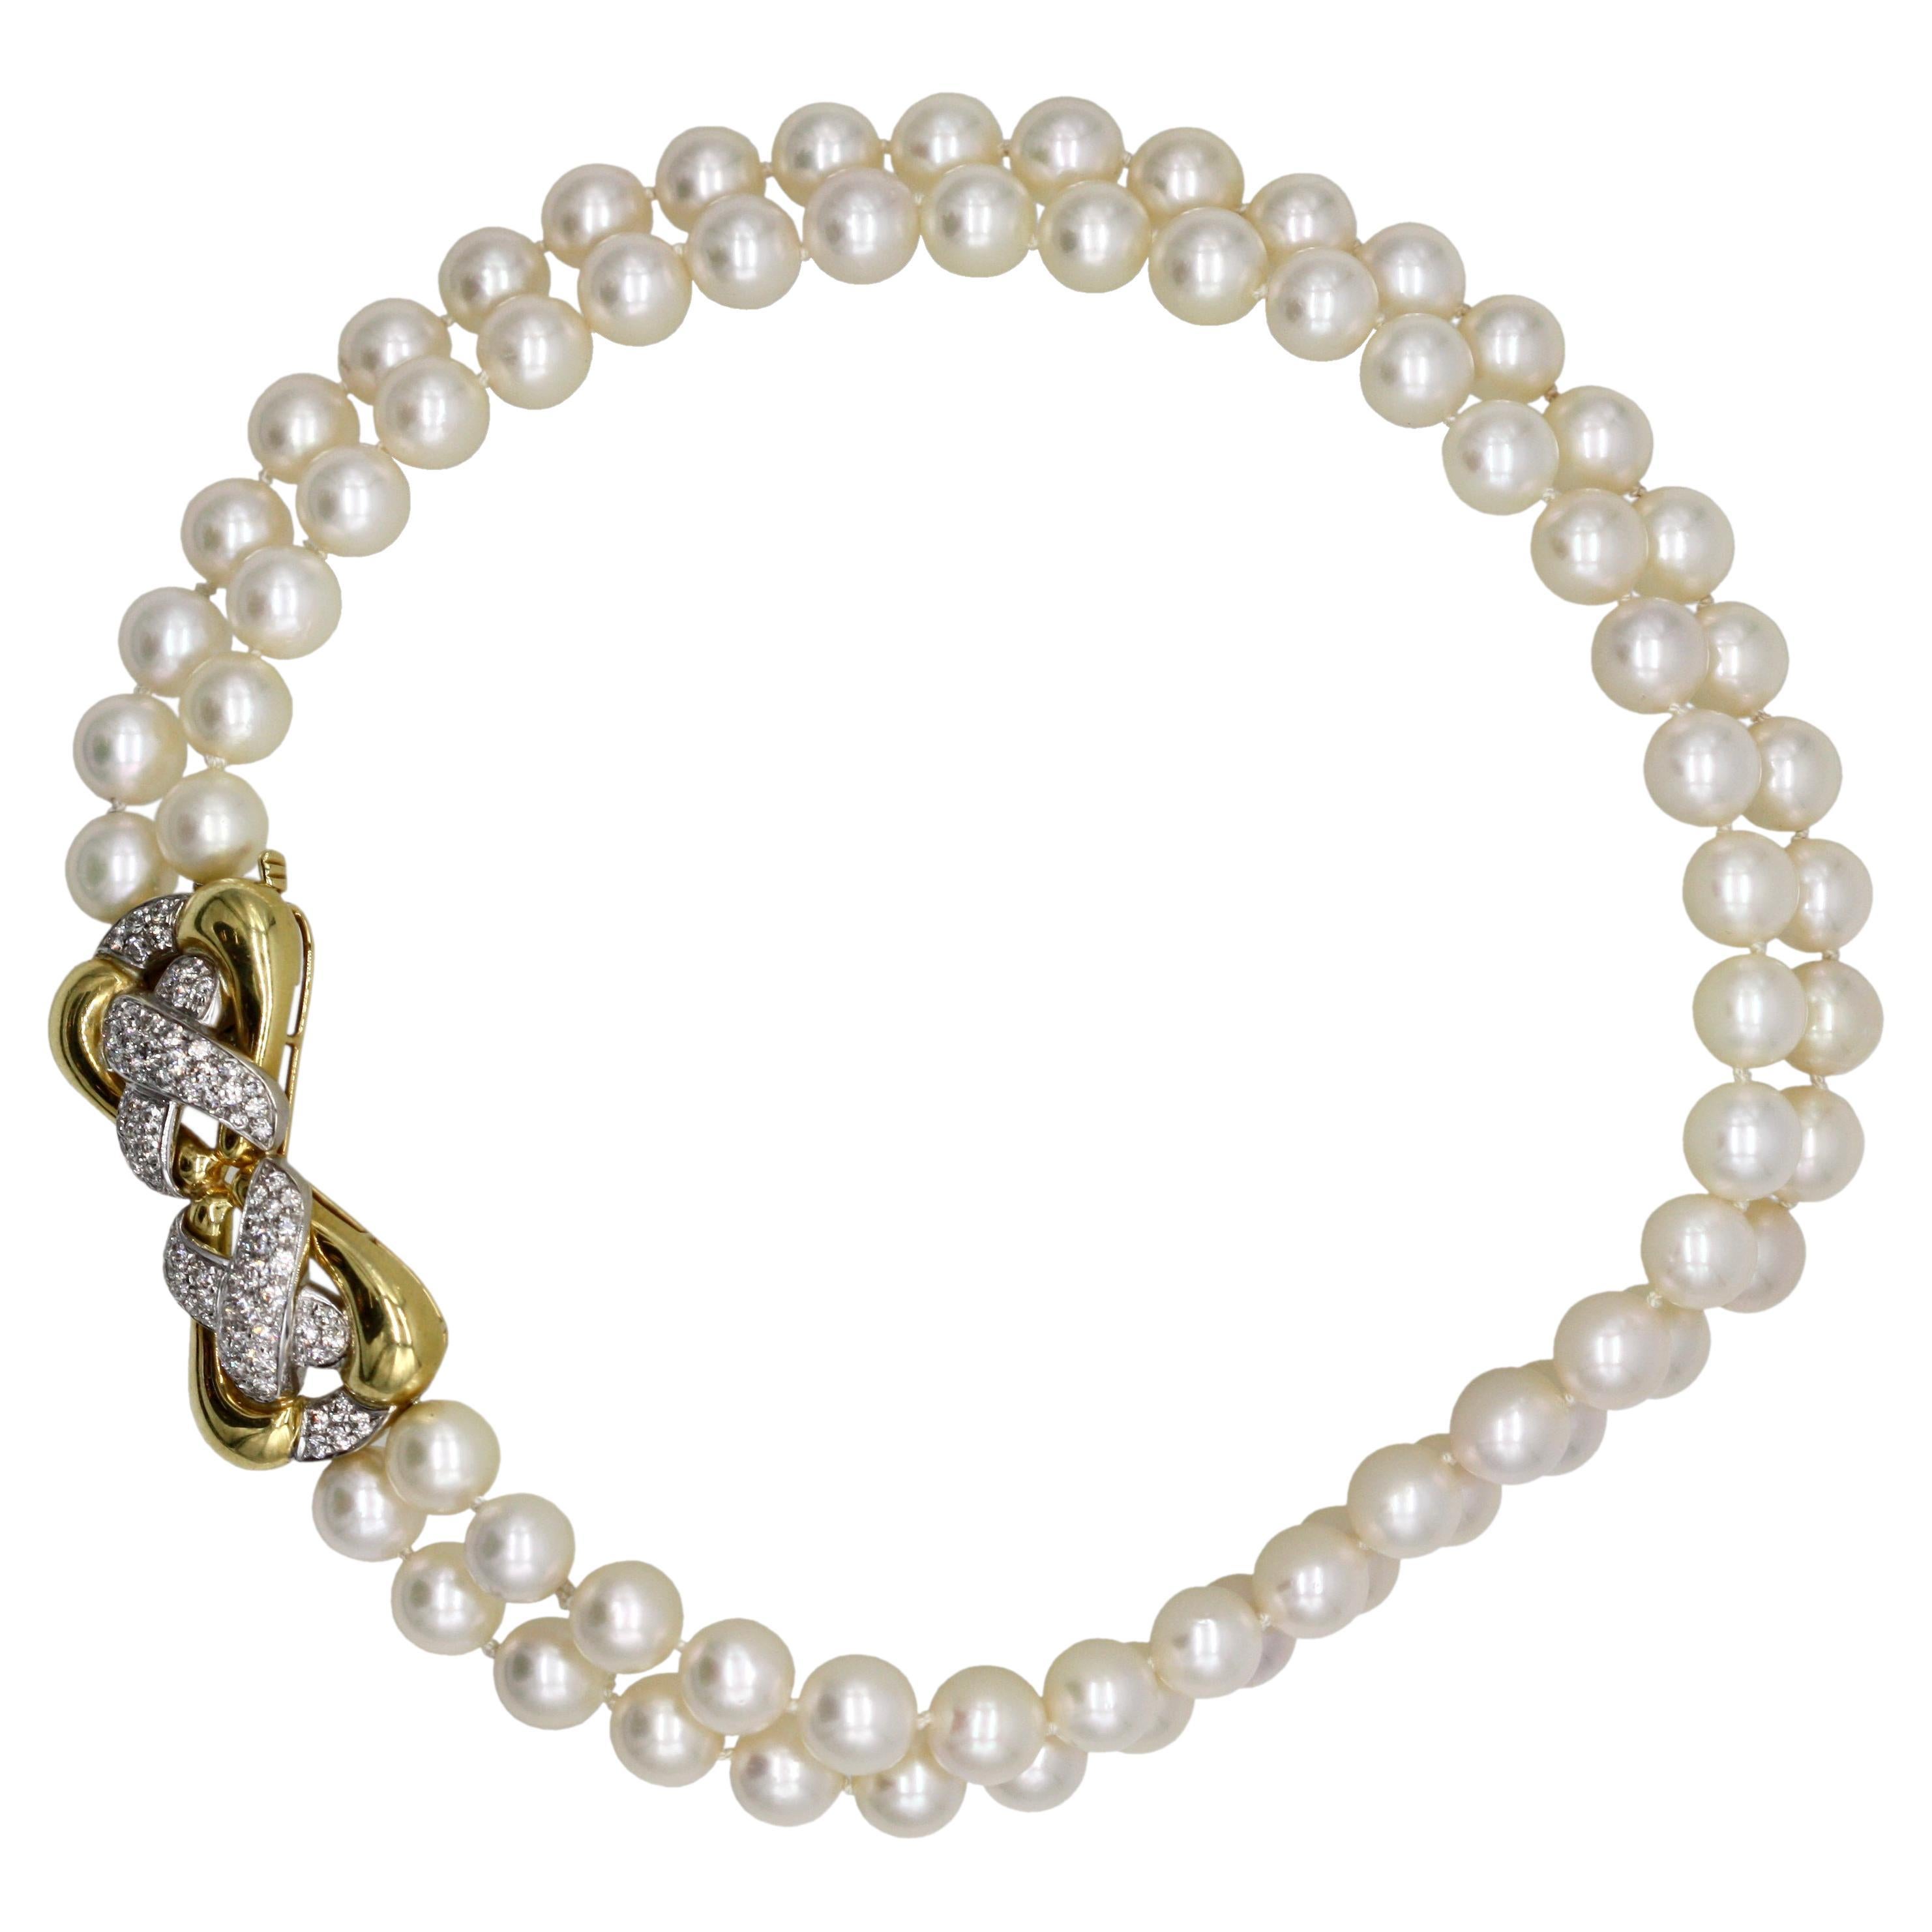 18 Karat yellow Gold, Double Strand Cultured Pearl and Diamond Necklace, Emis